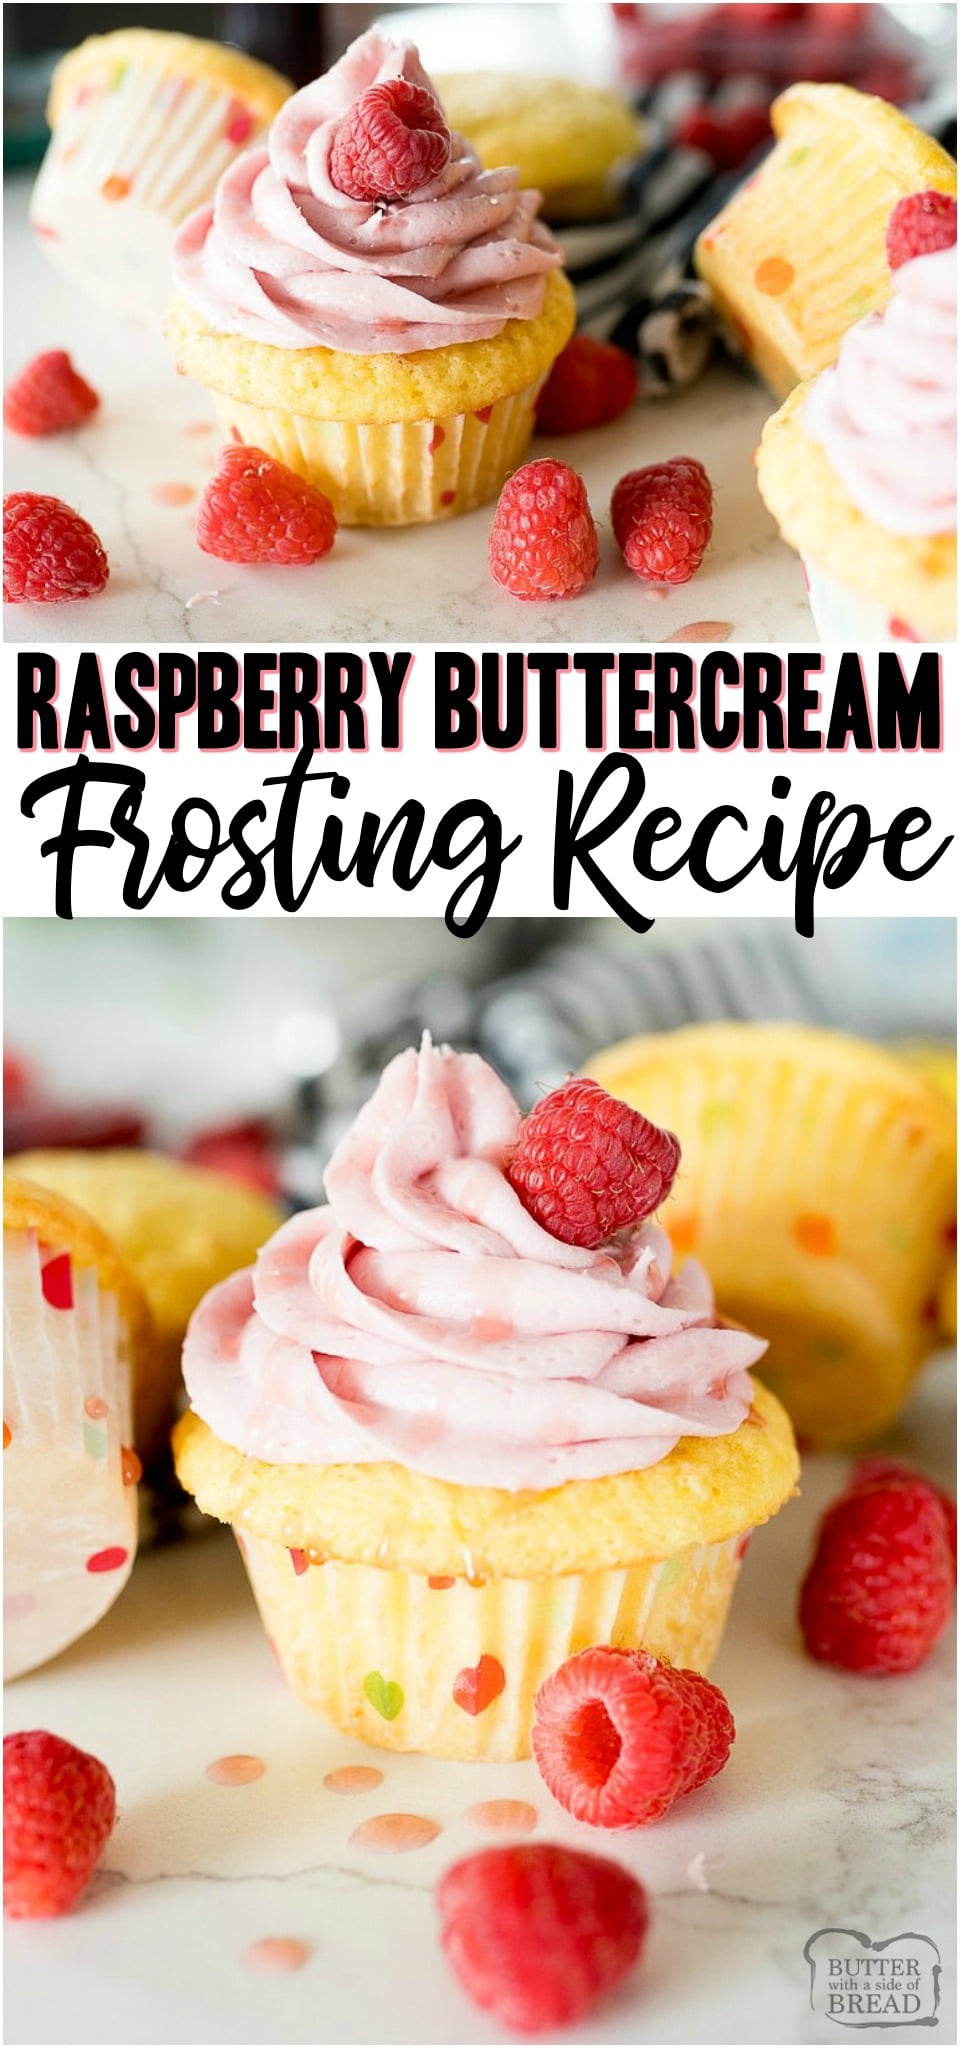 Raspberry Buttercream Frosting is a homemade frosting recipe made with butter, powdered sugar and raspberry jam! Perfect for topping cakes, cupcakes, or sweet rolls!